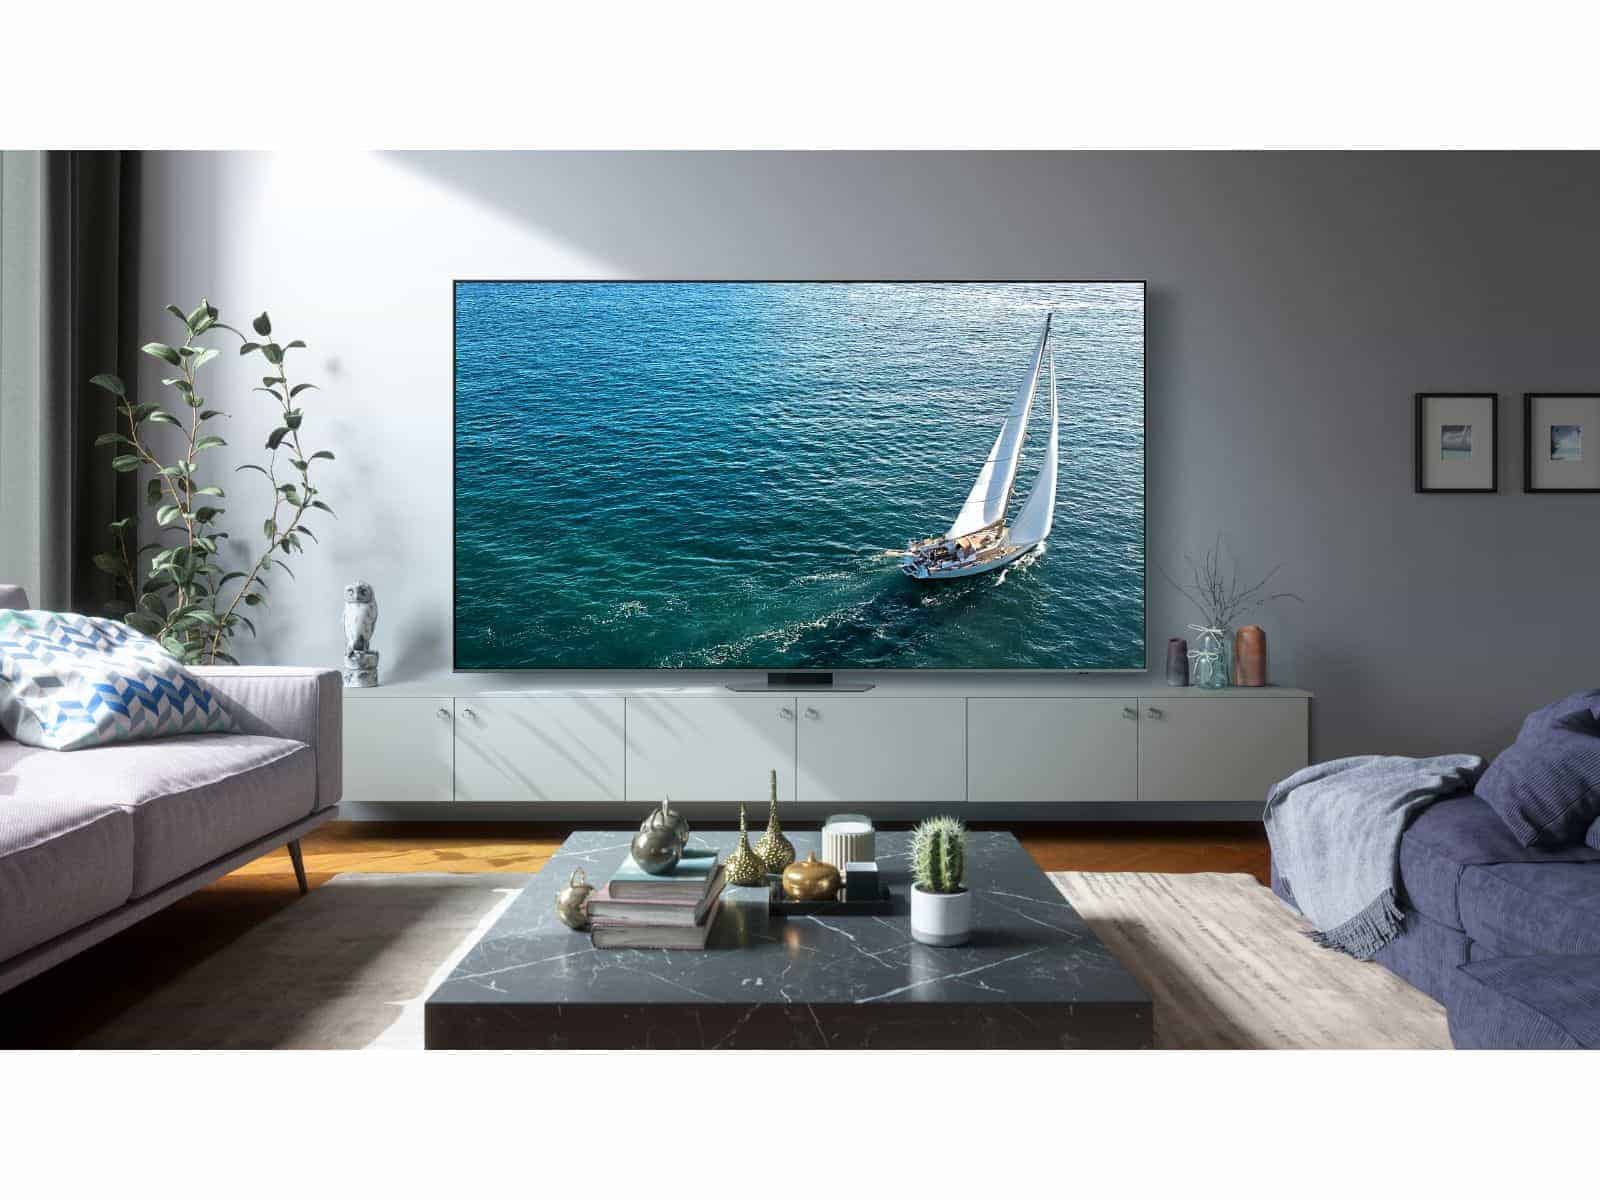 Save $1000 when you pre order the new Samsung 98″ Q80C QLED 4K TV